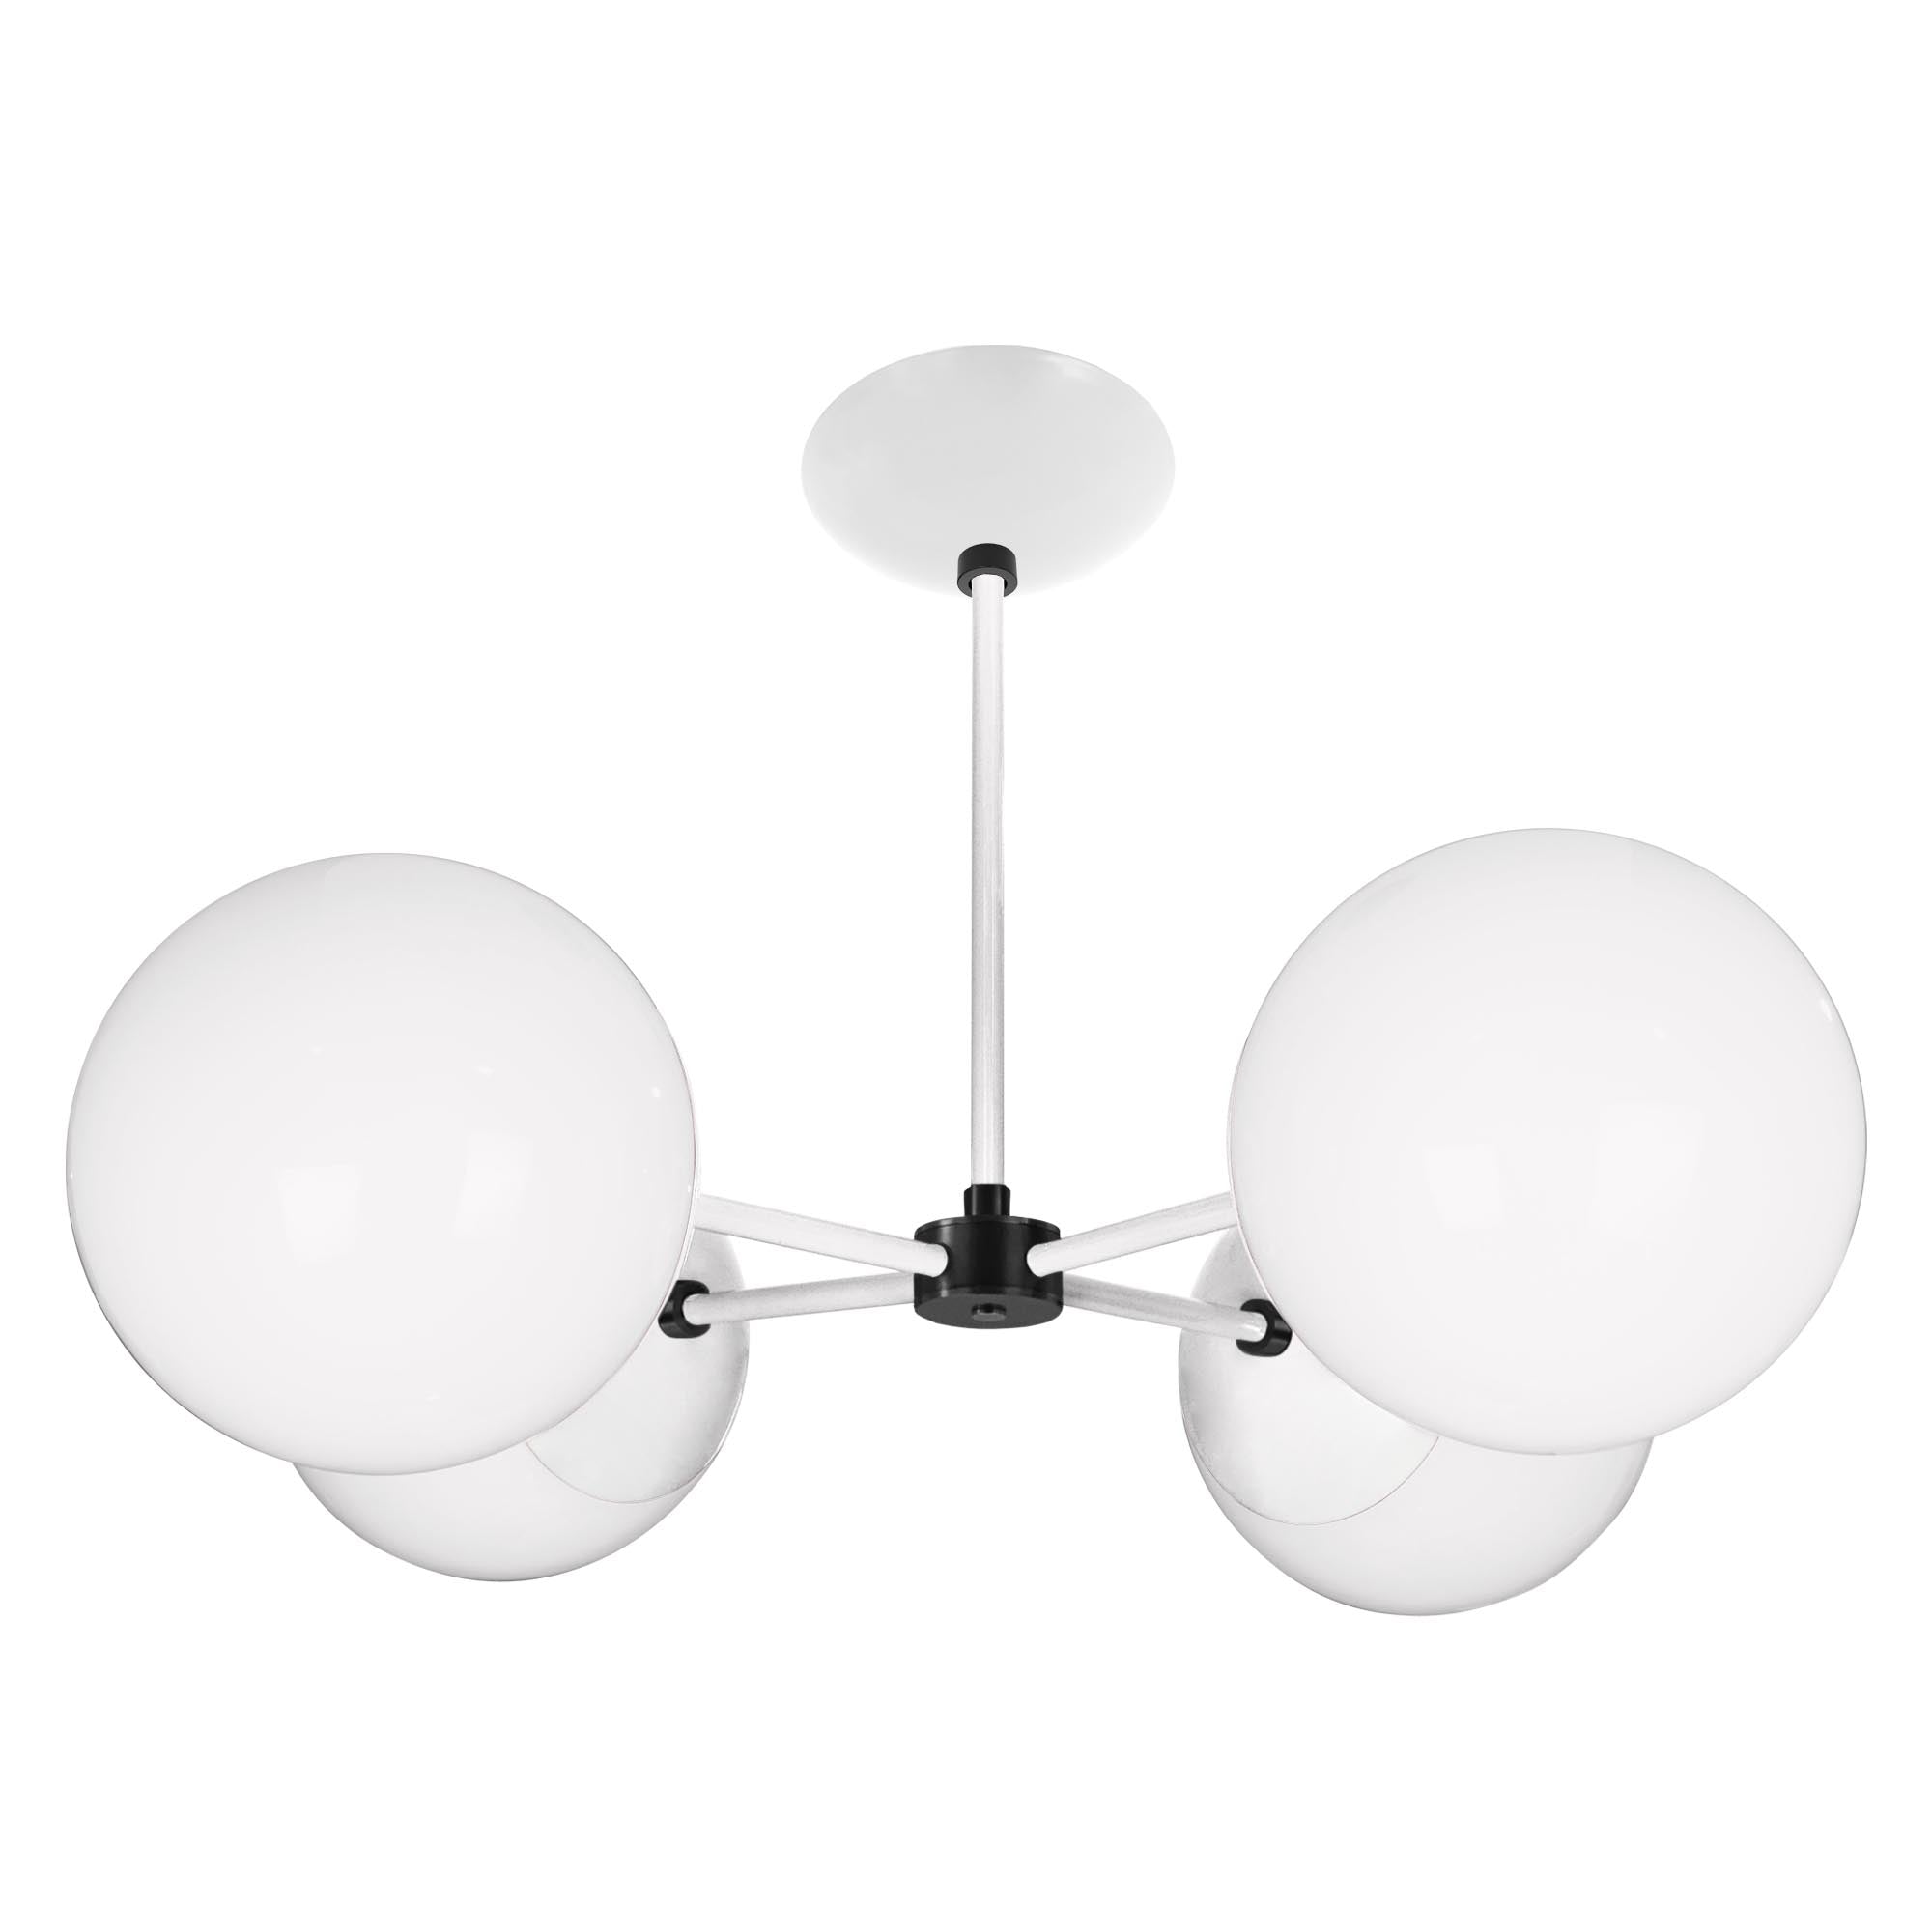 Black and white color Big Orbi chandelier Dutton Brown lighting